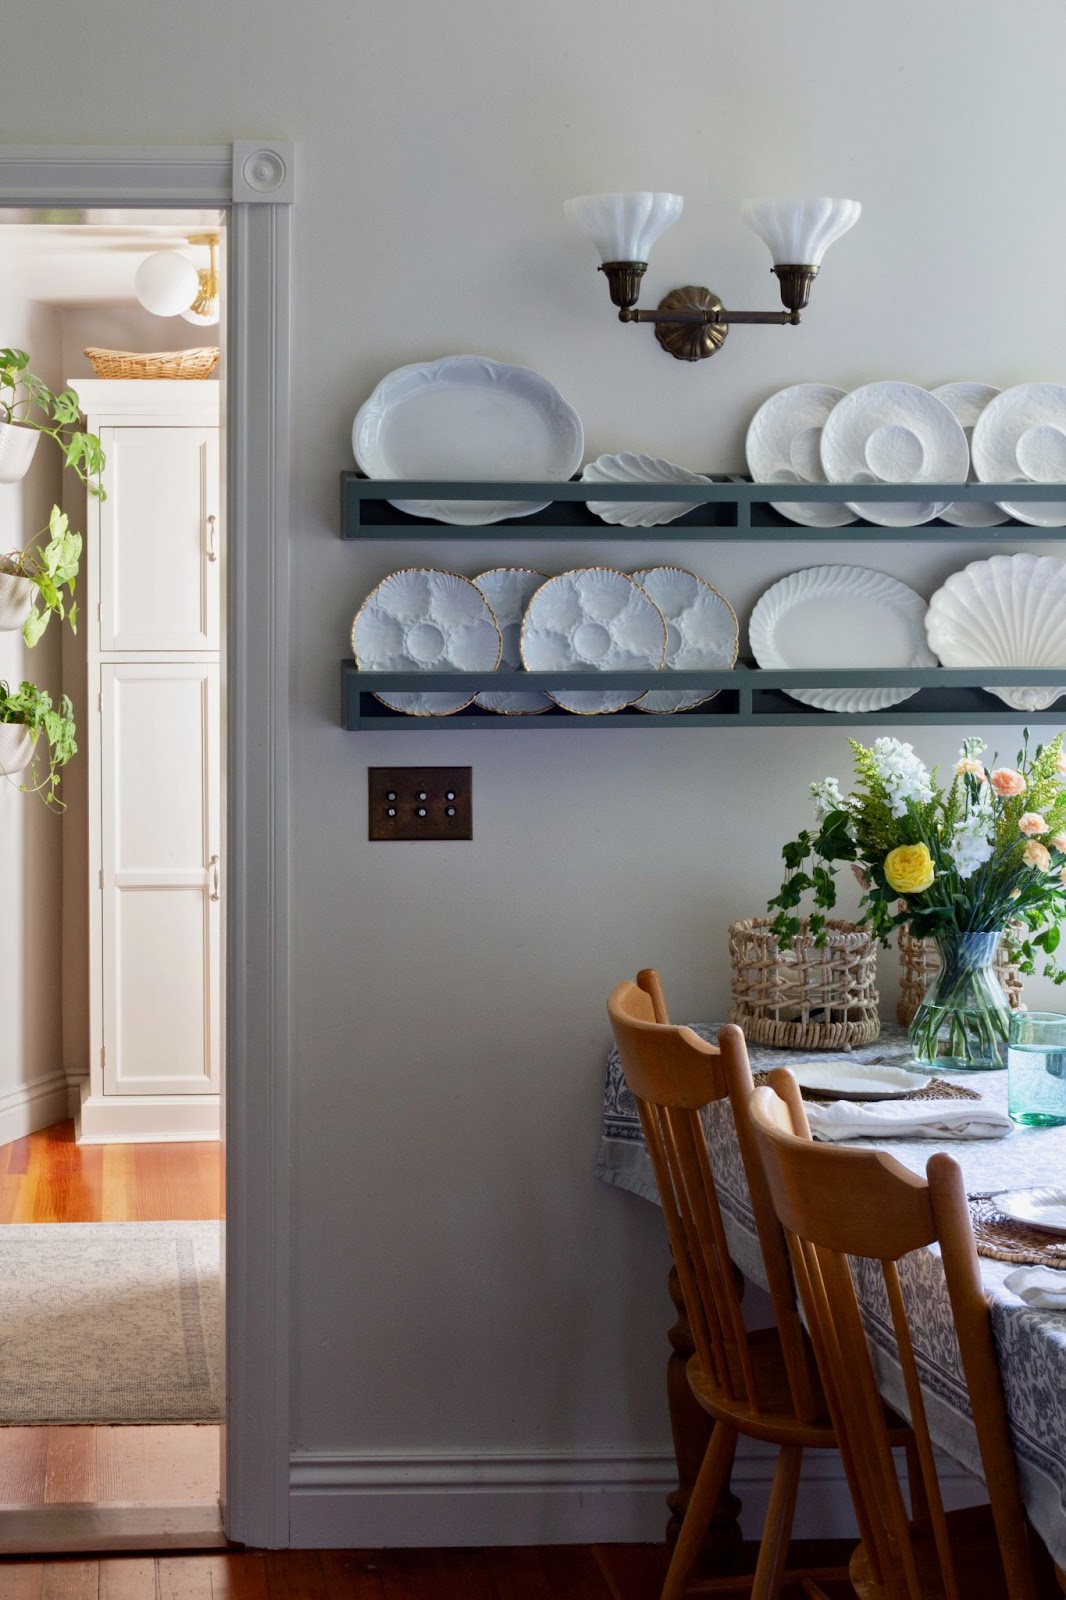 Wooden chairs surround a rectangular table covered with a floral tablecloth, showcasing white ceramic plates on open shelves in Kim Lucian's dining room